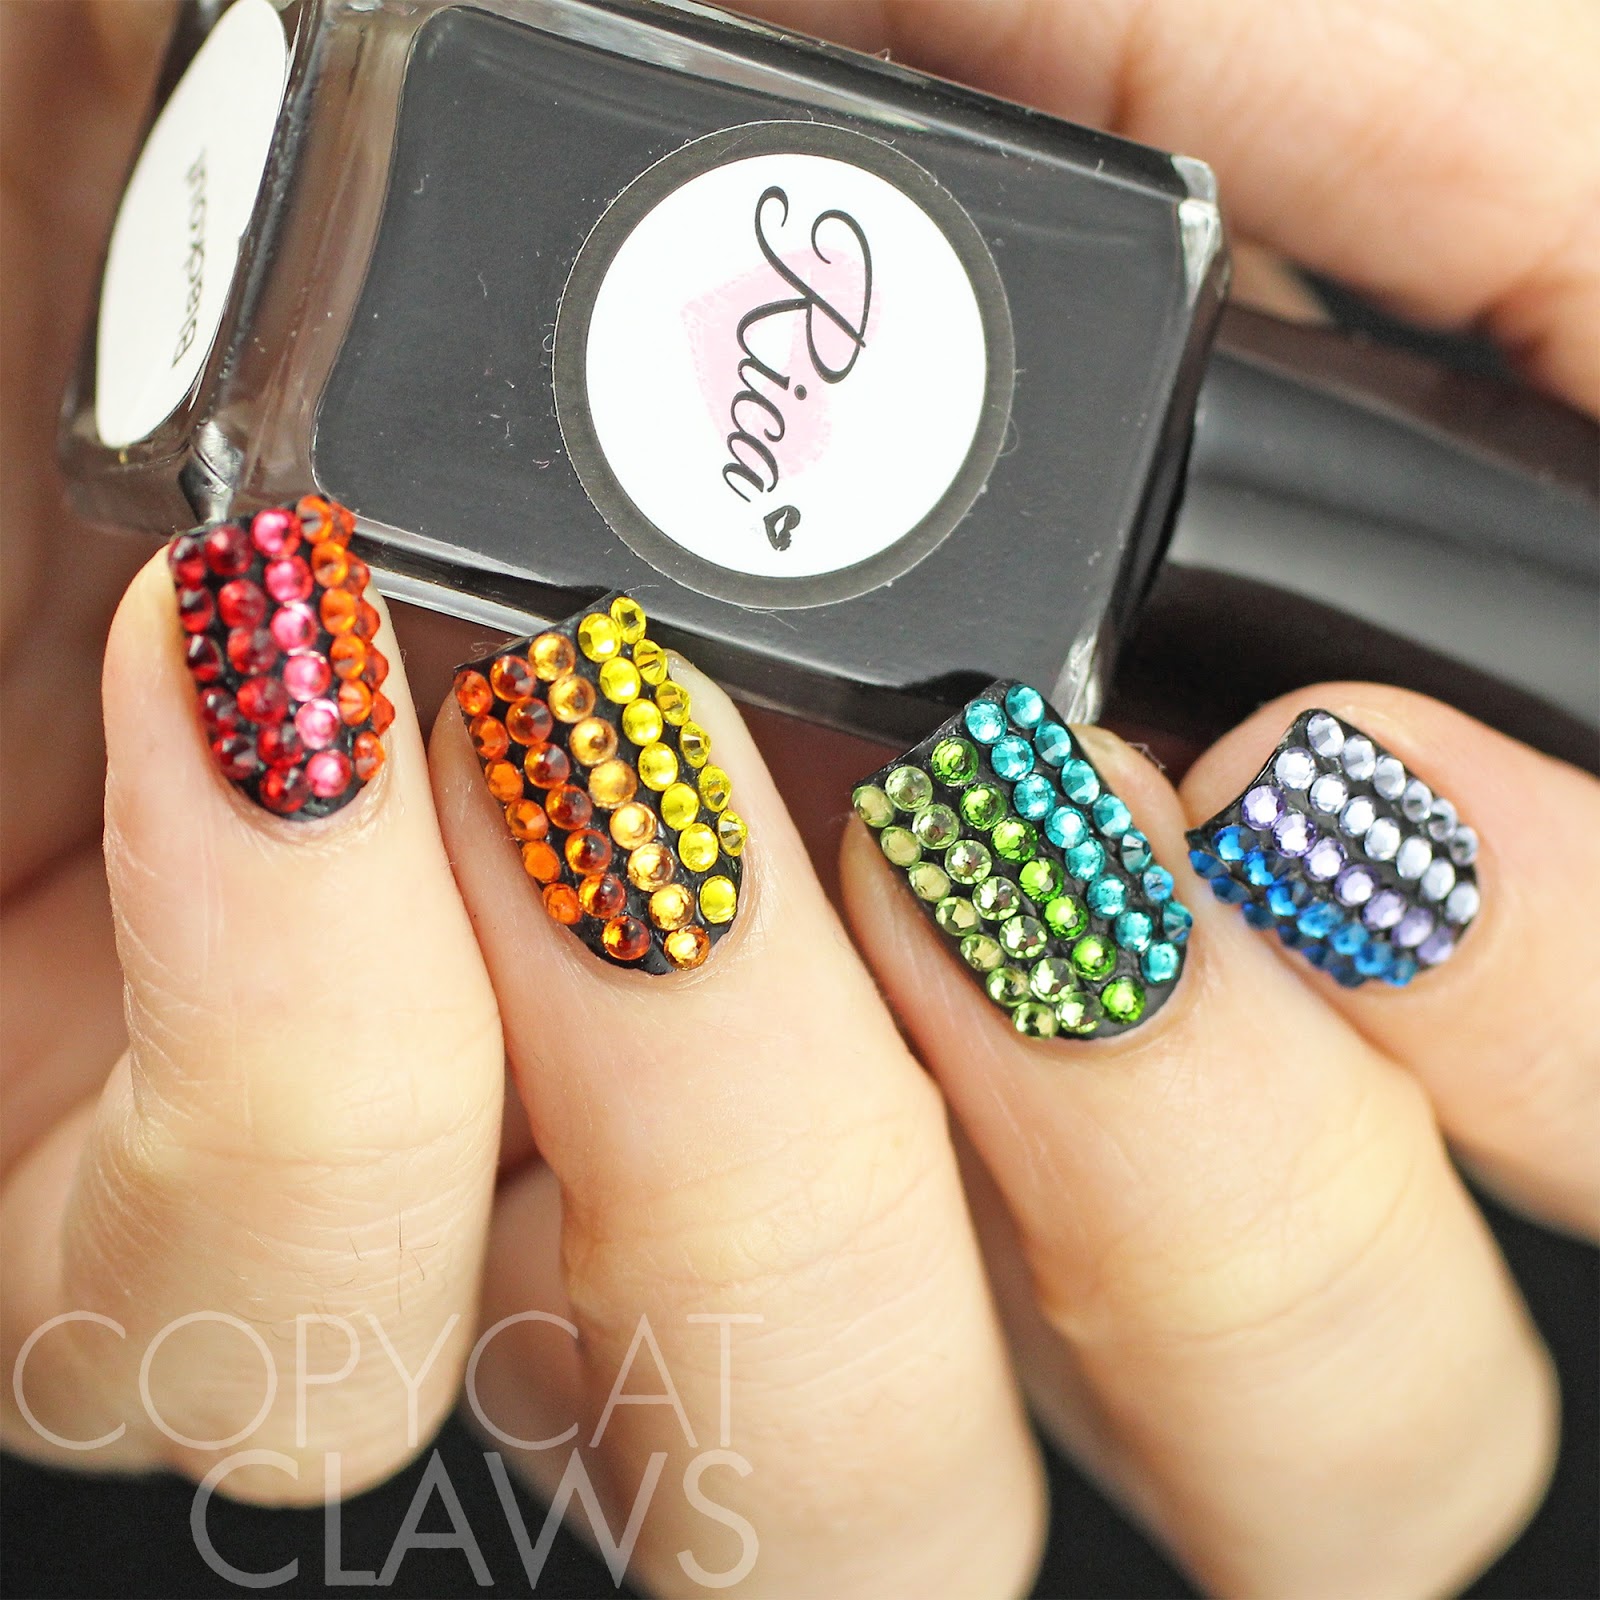 Swarovski Crystals for your Nails - Artbeads Blog